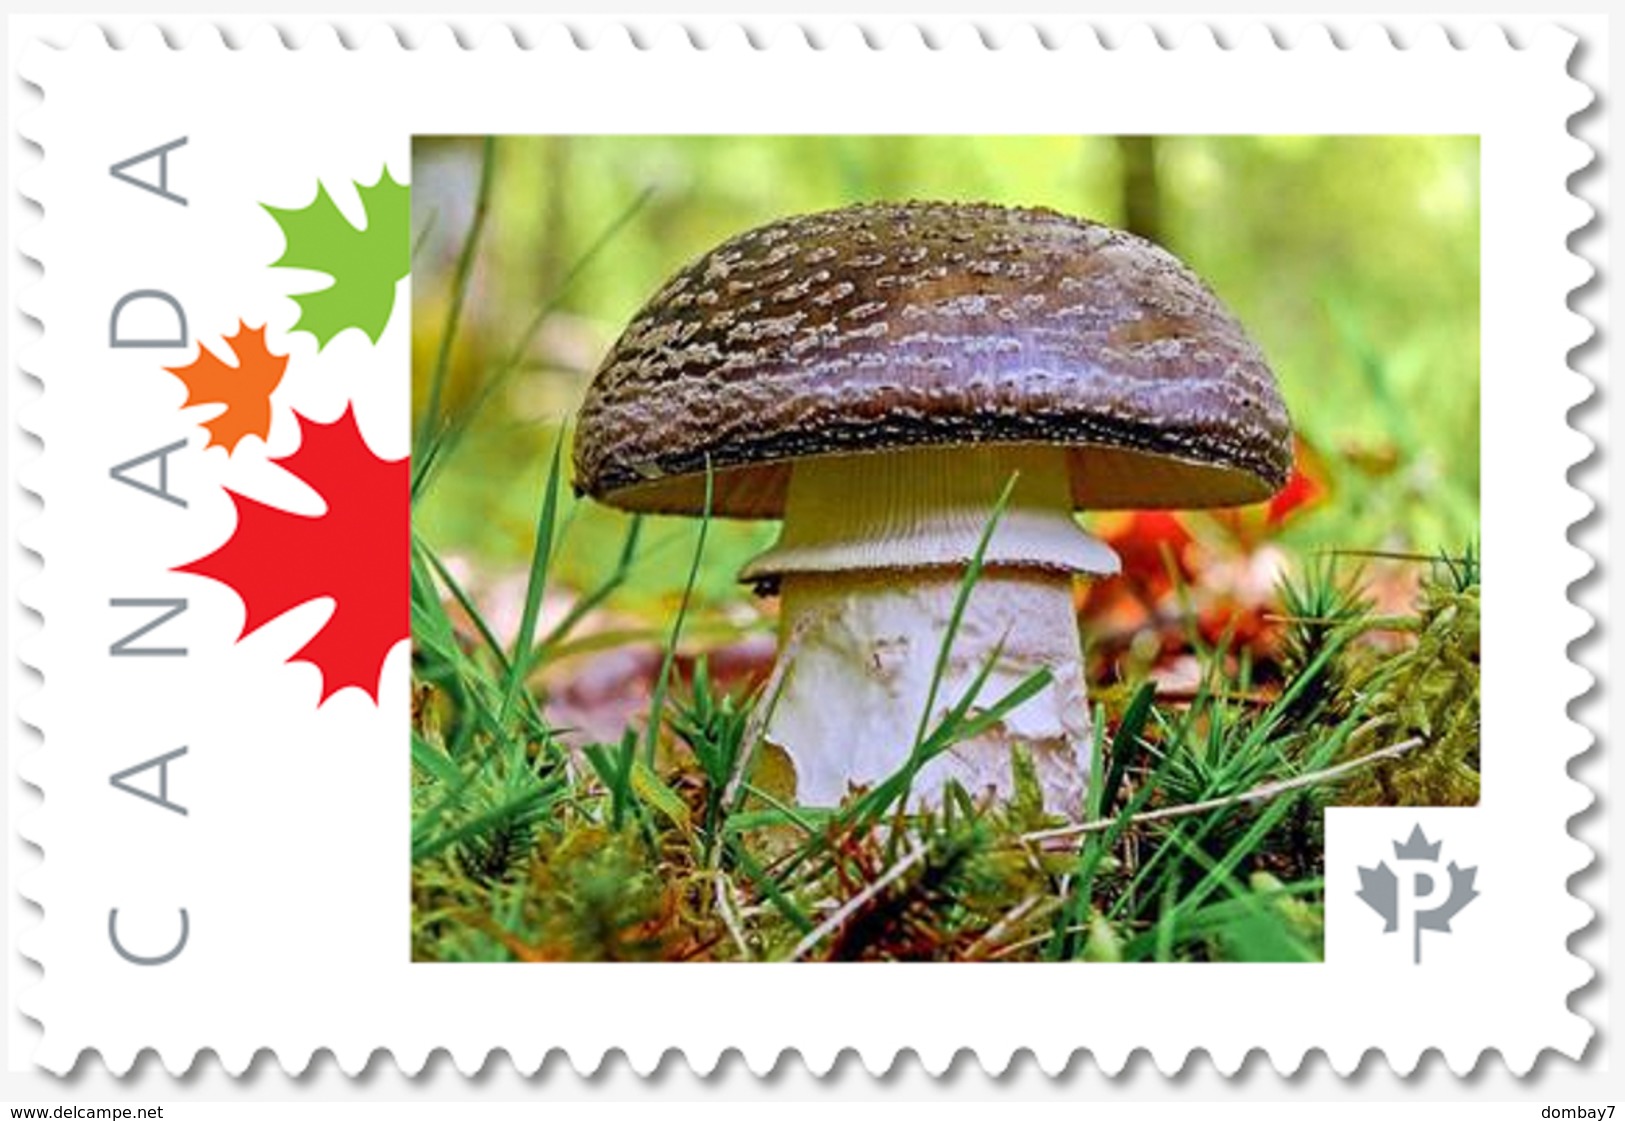 BROWN MUSHROOM = Personalized Picture Postage Stamp MNH Canada 2018 [p18-09-10] - Mushrooms